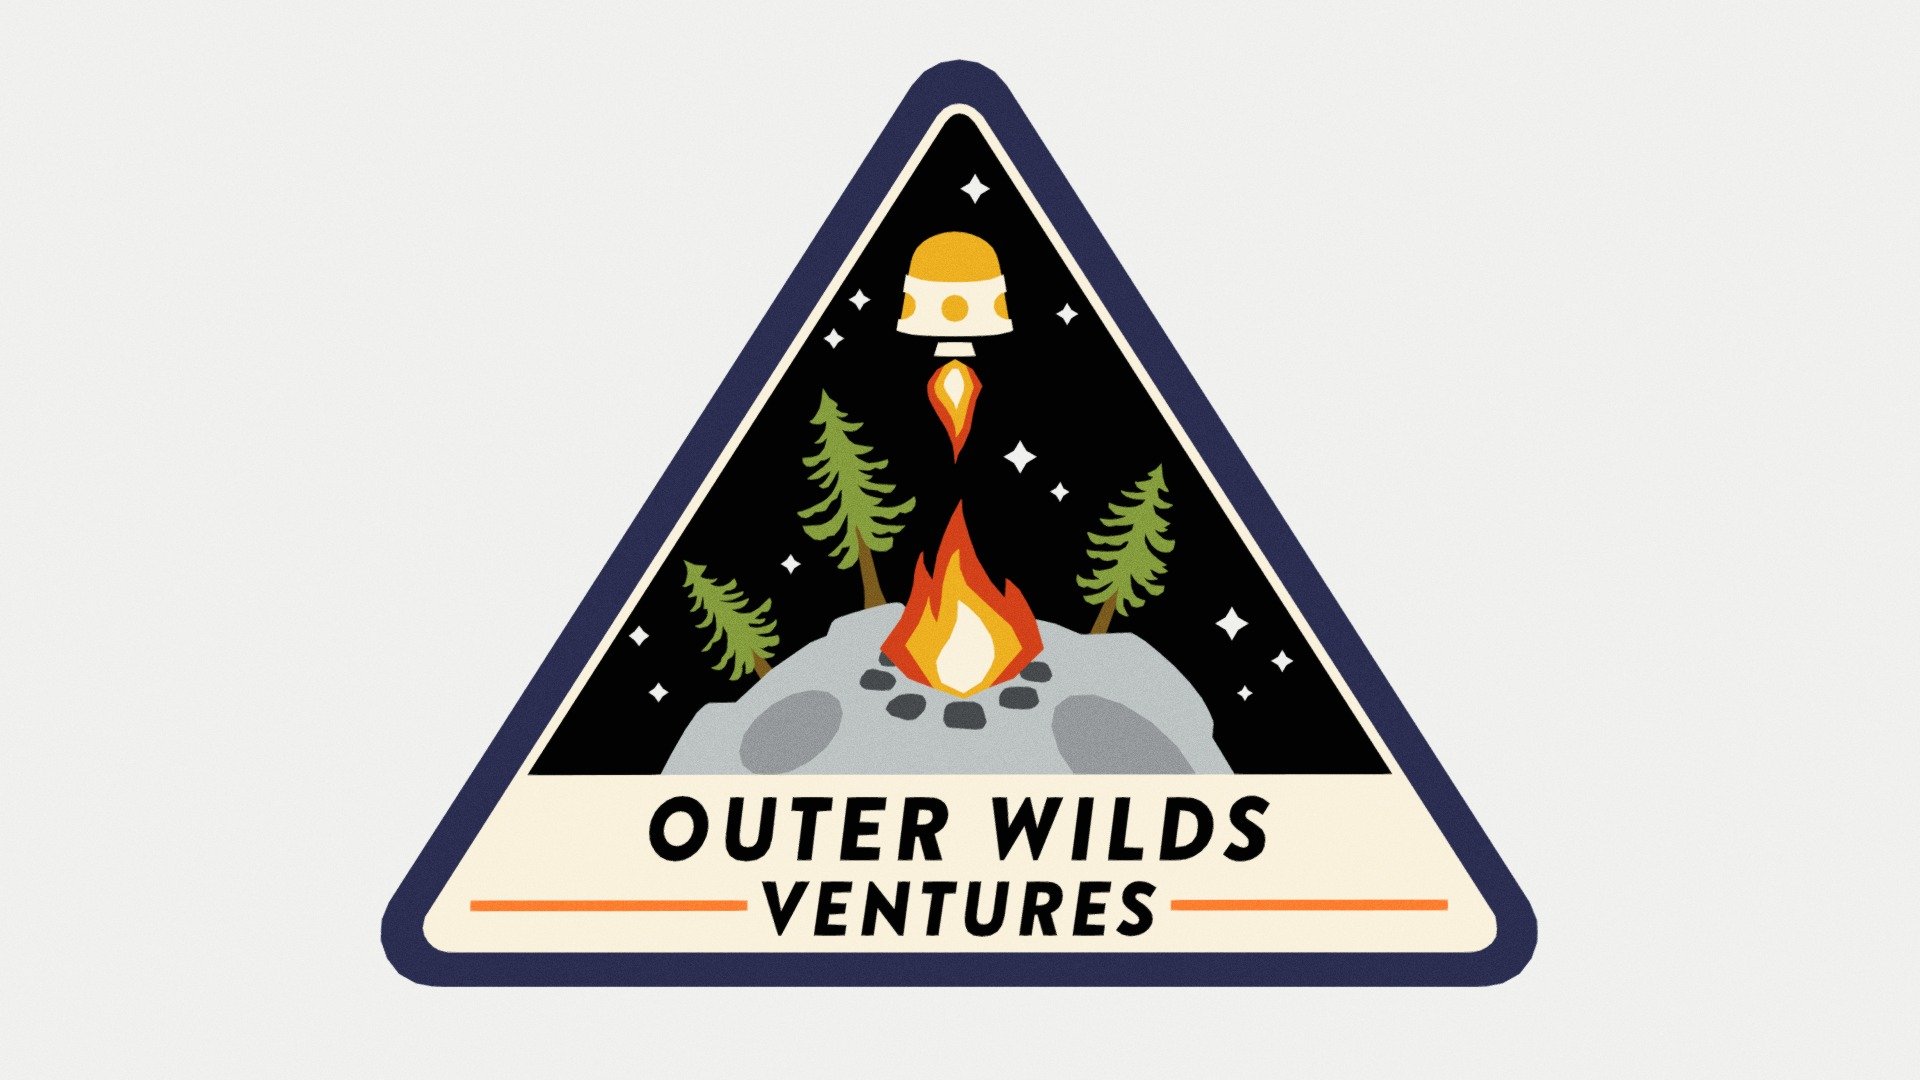 Mission Patch - Outer Wilds